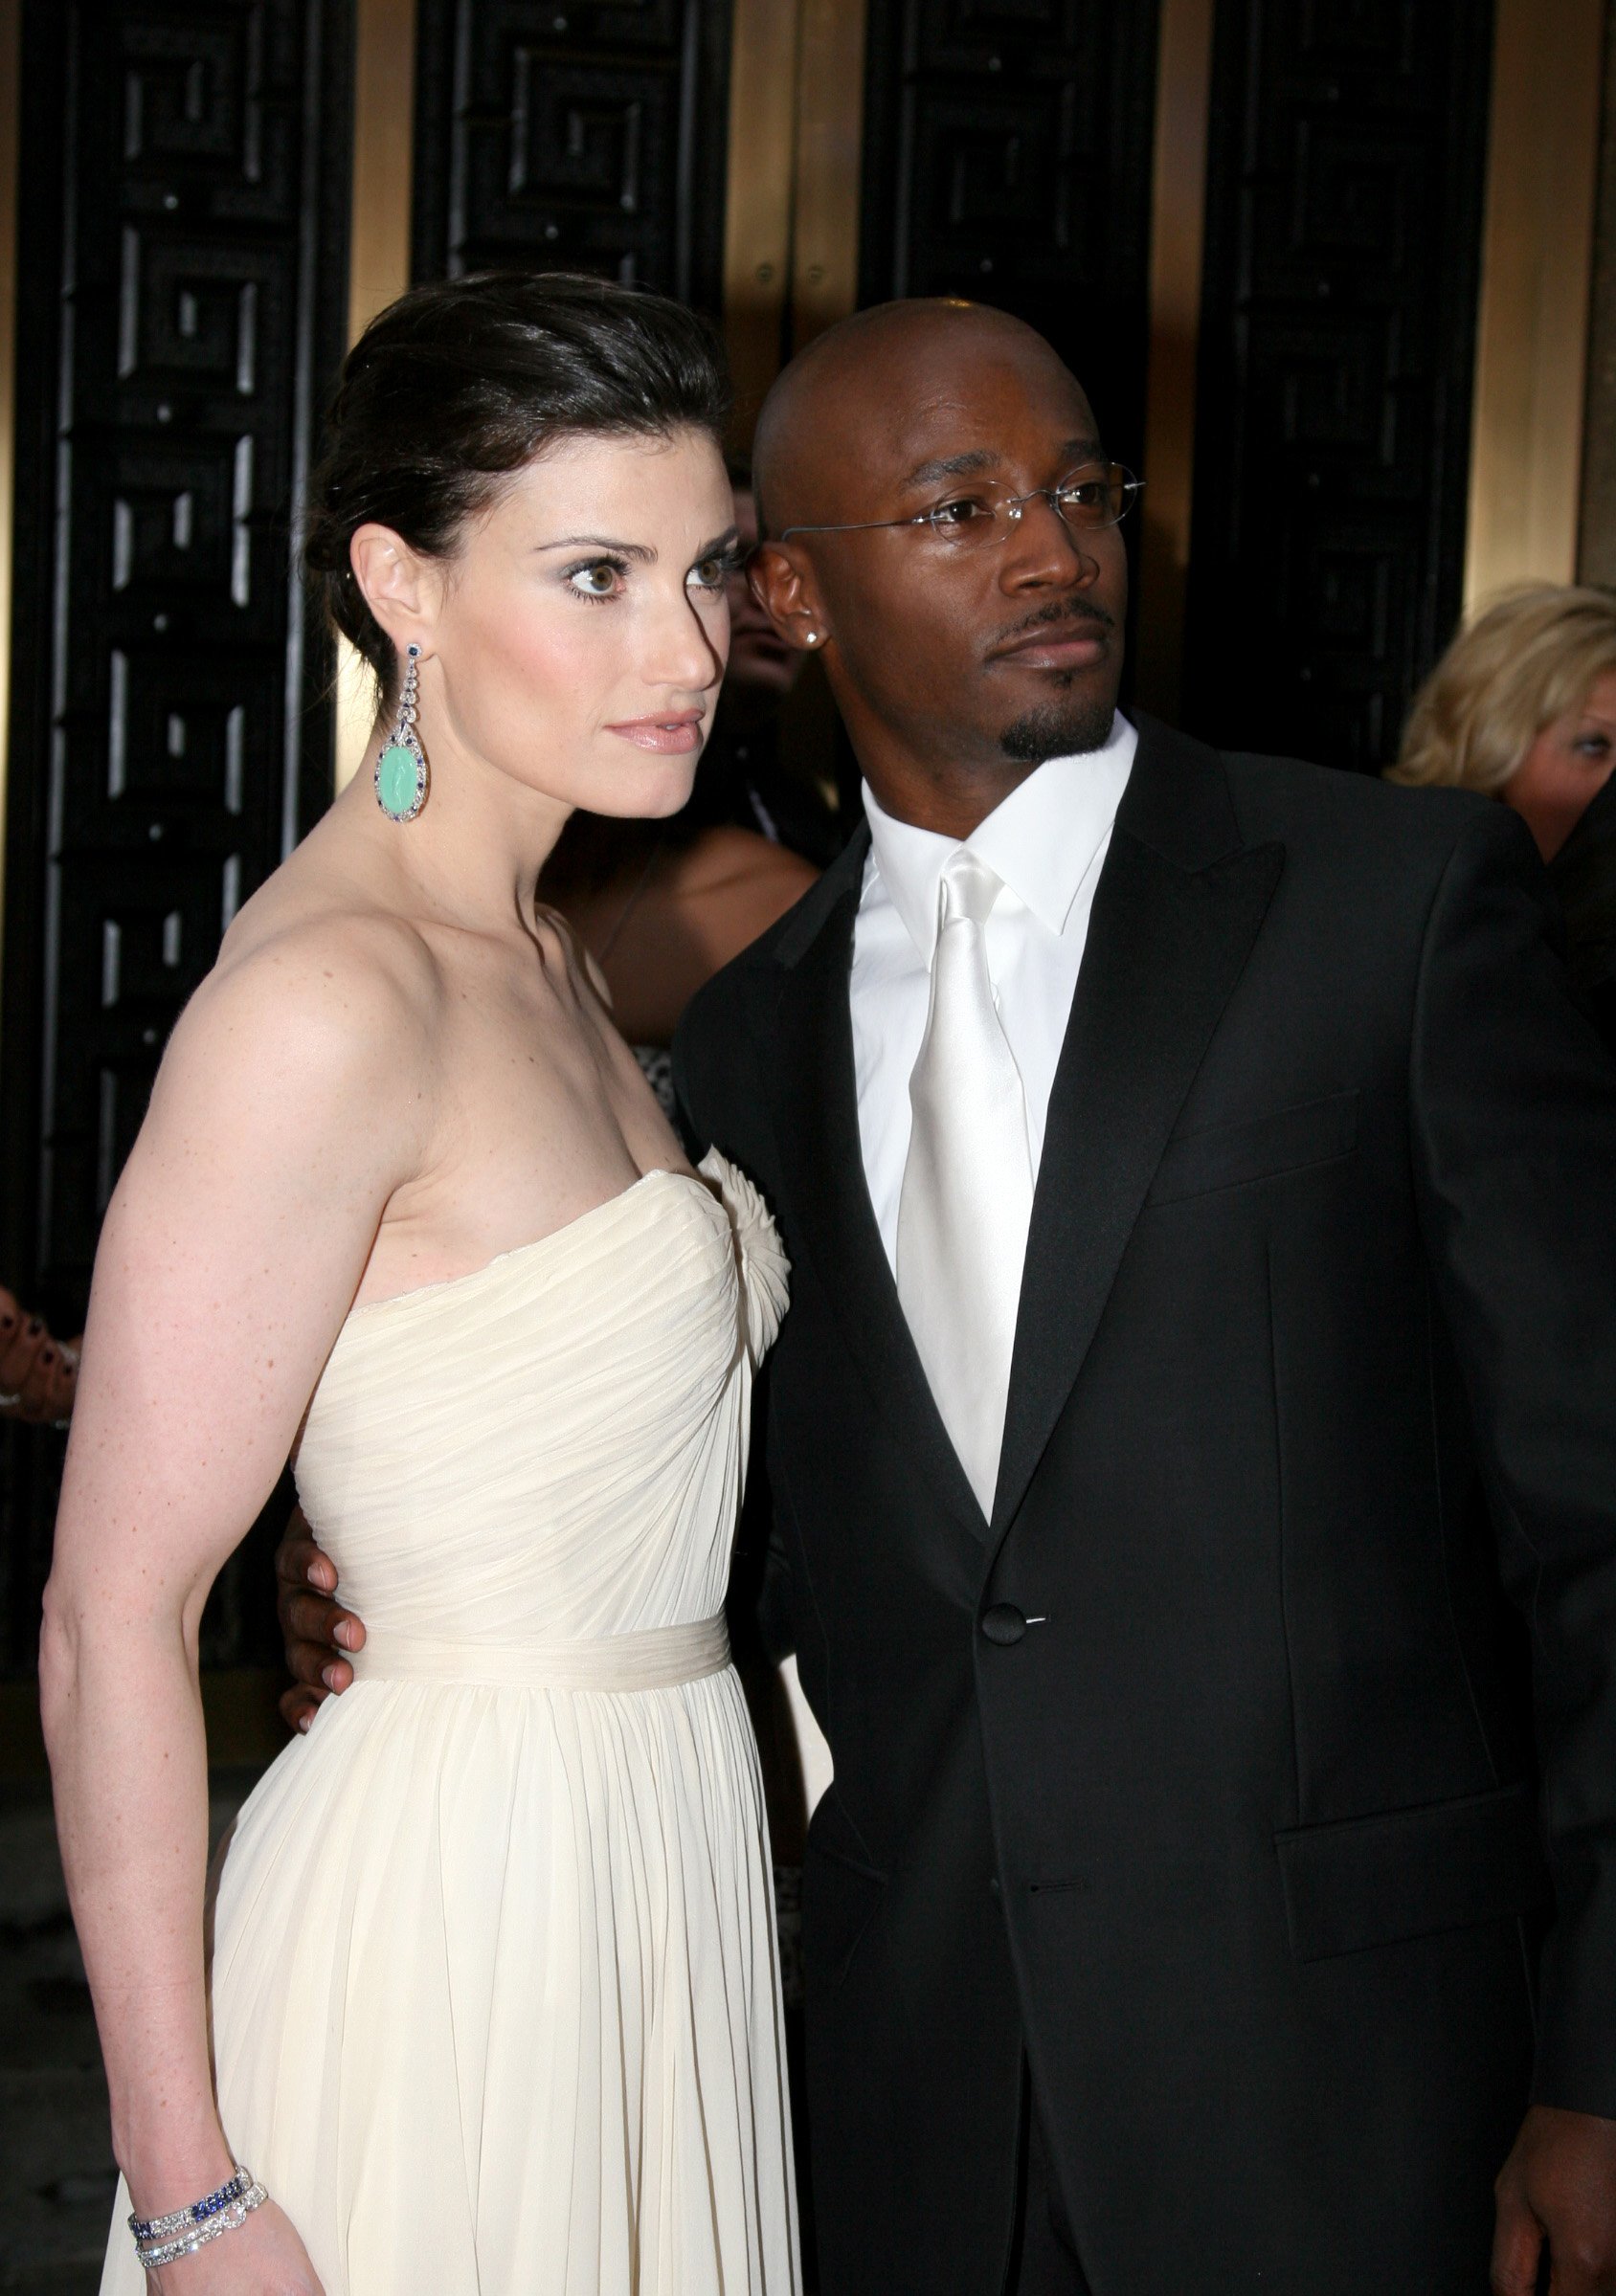 Idina Menzel and Taye Diggs pose during 61st Annual Tony Awards in New York City | Source: Getty Images